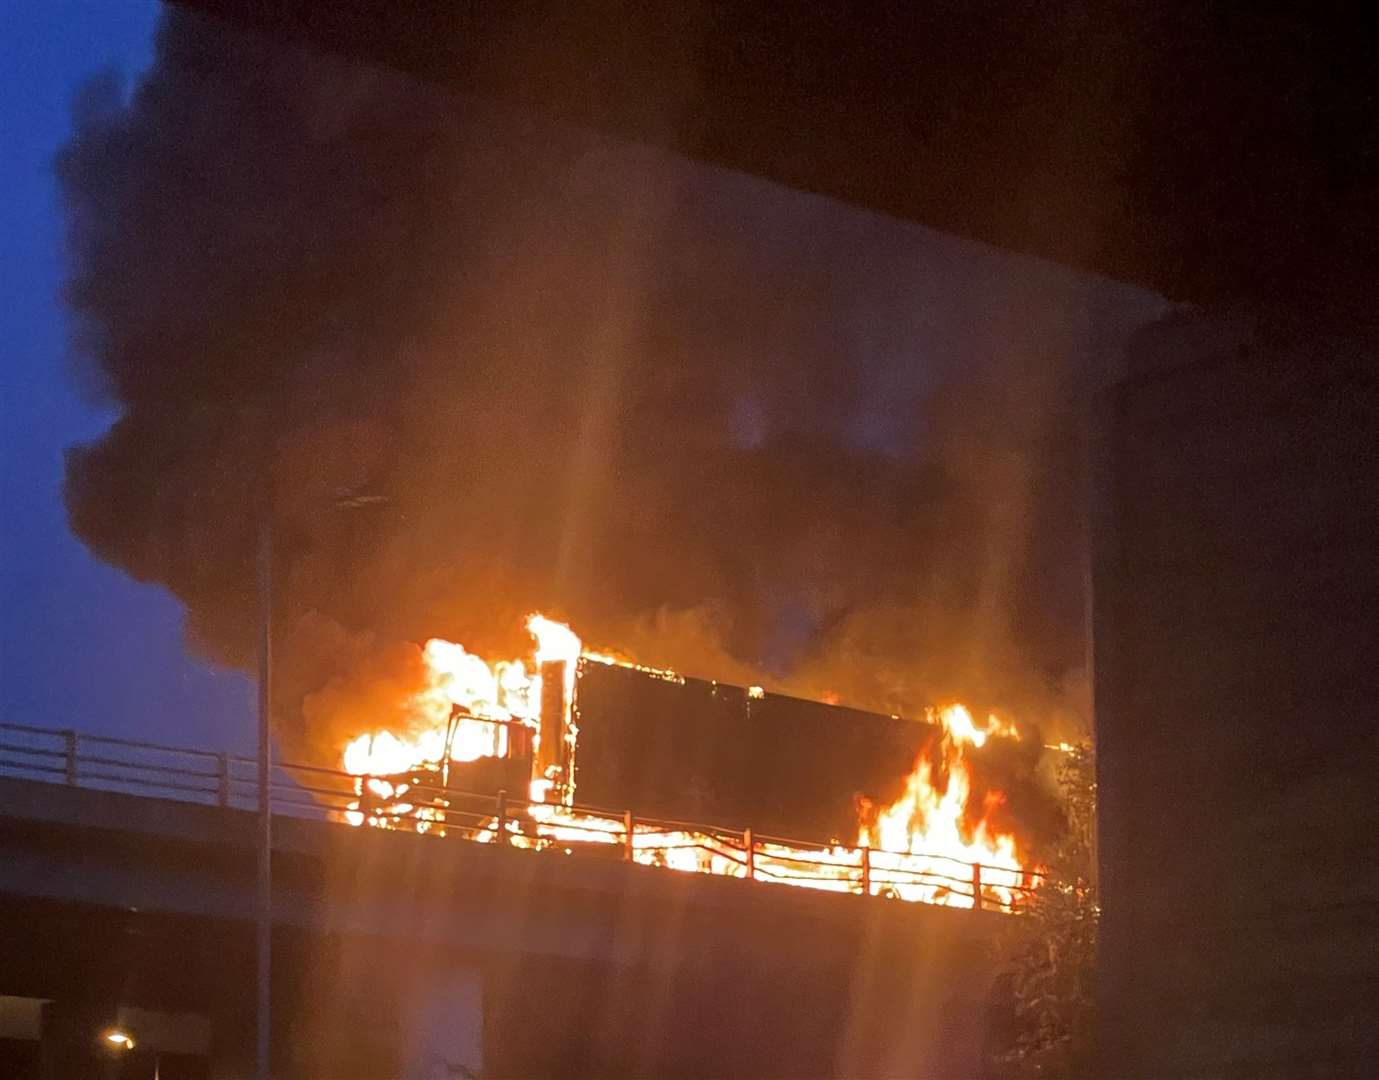 An HGV went up in flames near Rochester. Picture: KOSTAMIZE